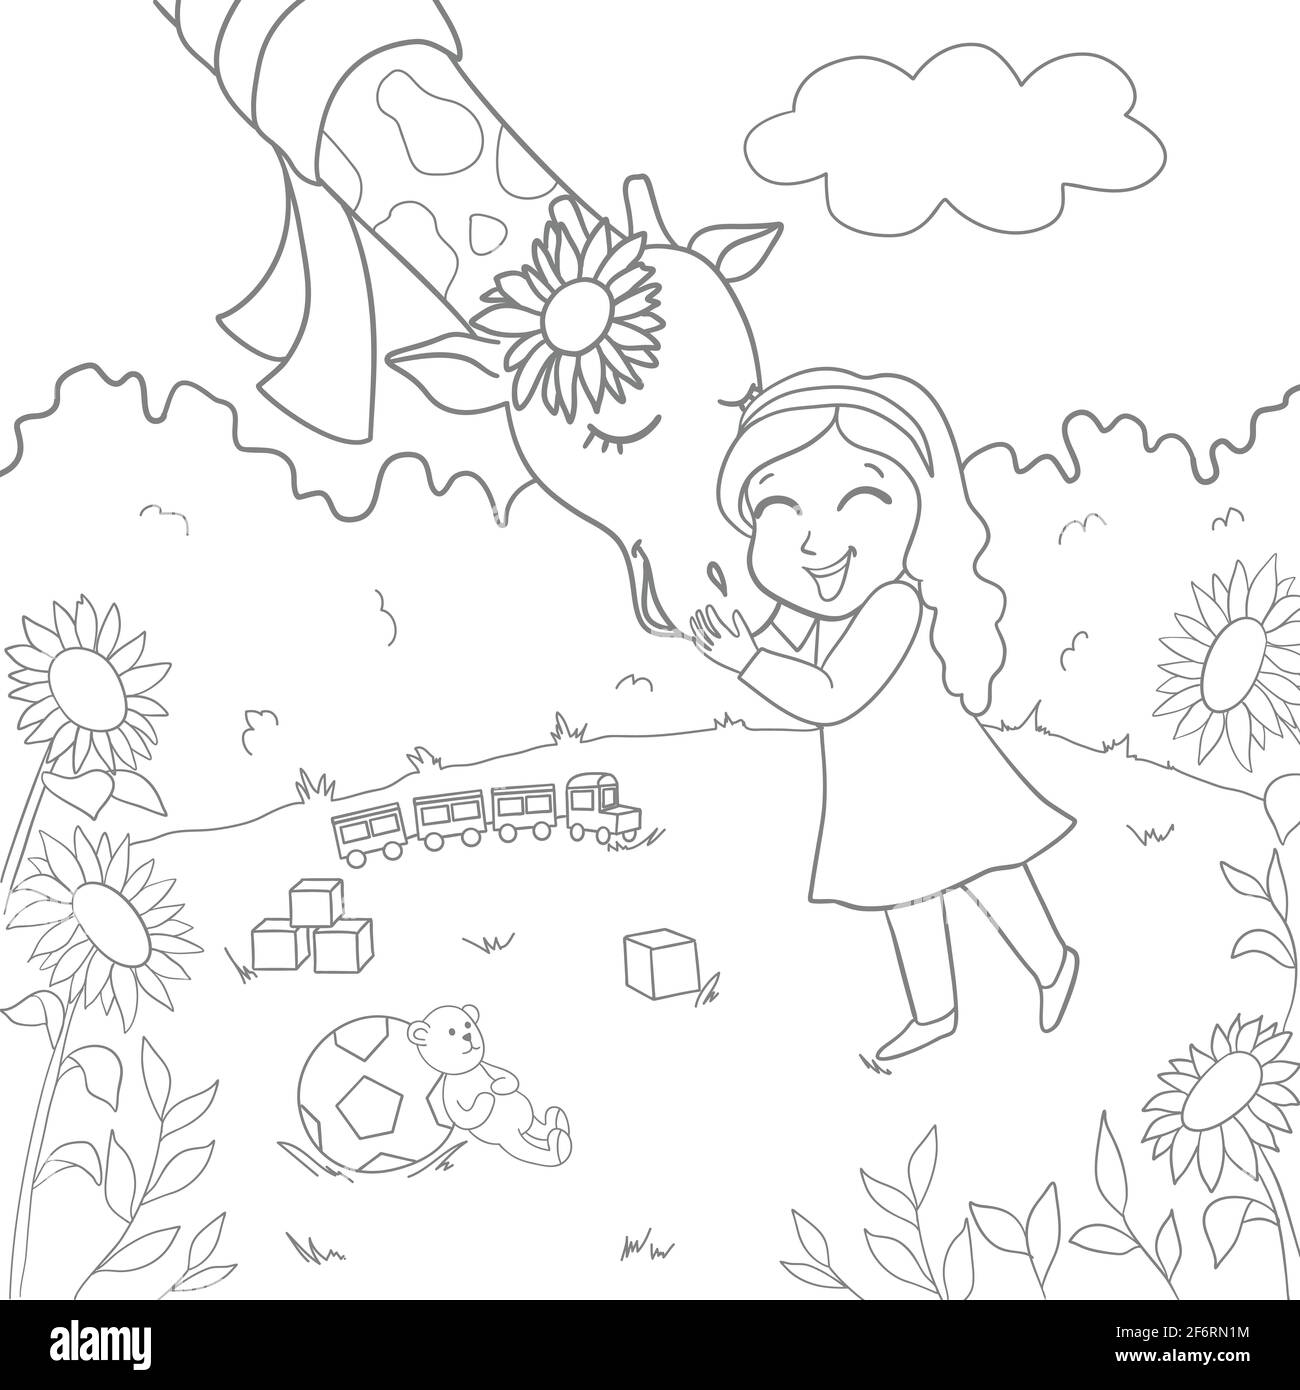 Girl hugging a giraffe. Vector illustration of hand-drawn. Coloring book for adults and children. Stock Vector